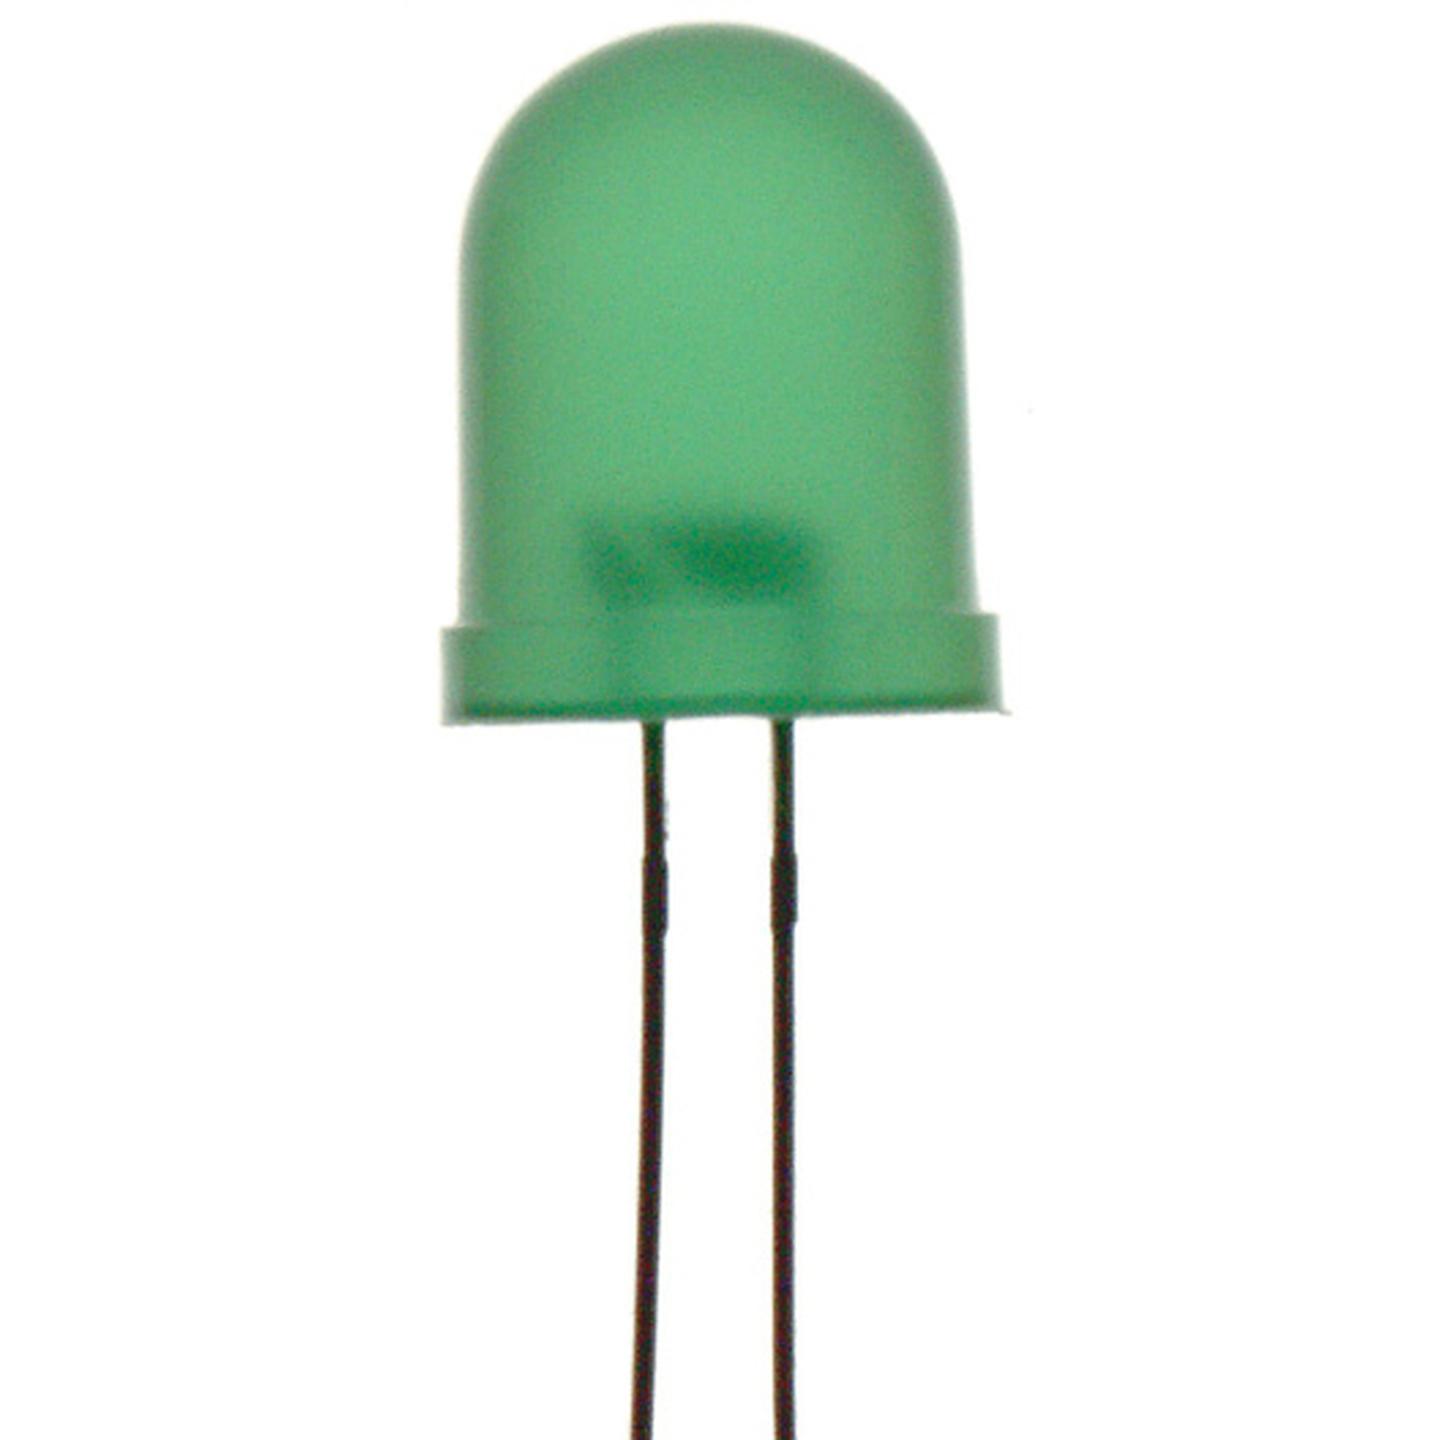 Green 3mm LED 40mcd Round Diffused